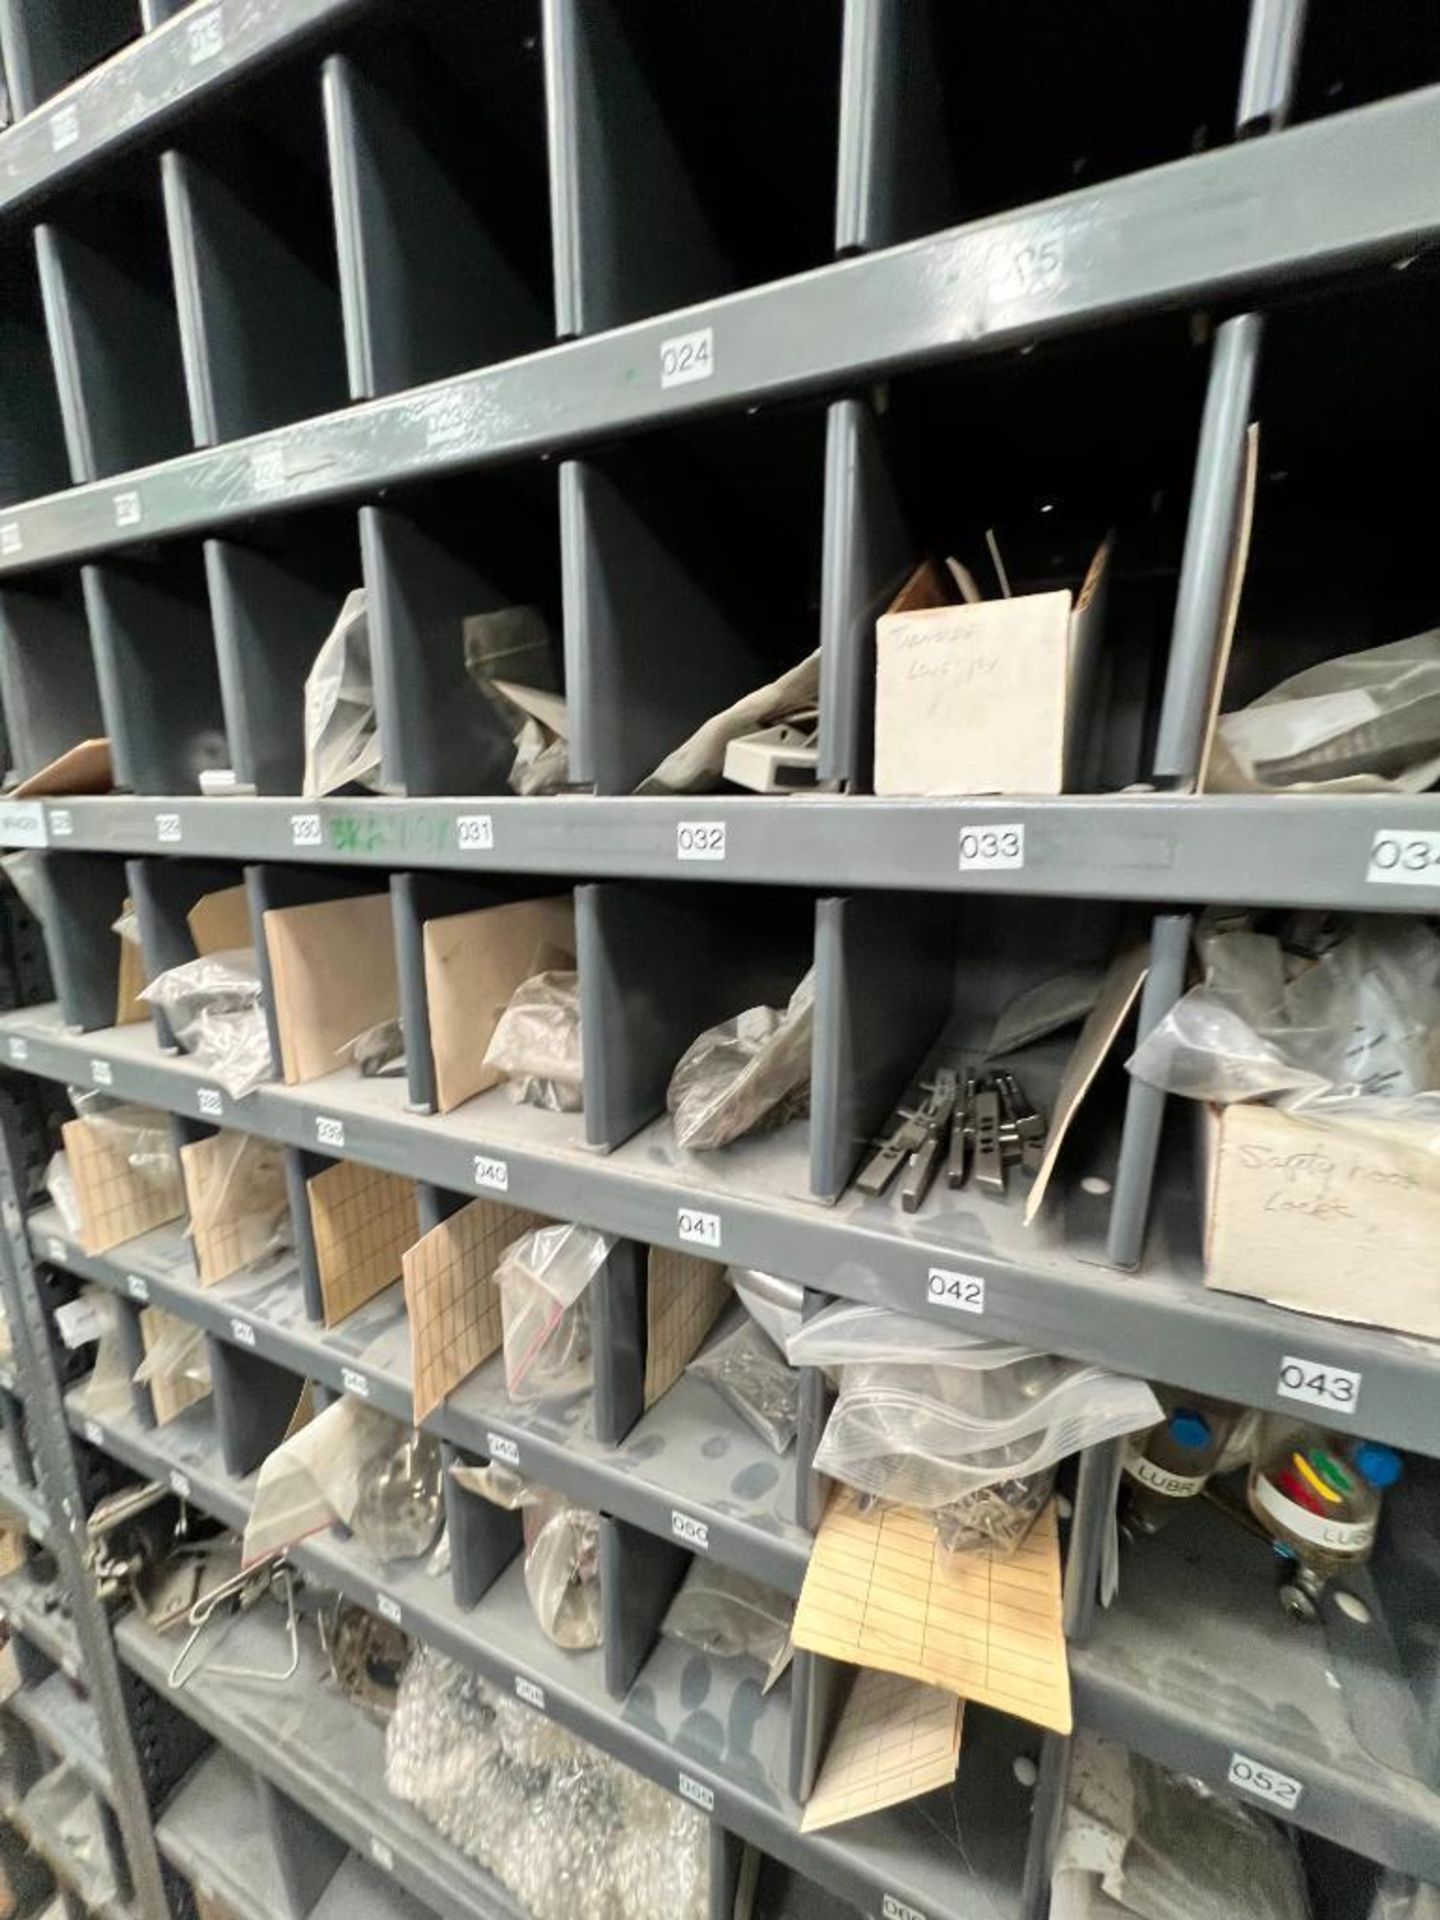 (28) Shelves of Assorted Parts, VERY LARGE LOT Consisting of MRO, Drives, Valves, PLC, Nuts, Bolts, - Image 35 of 67